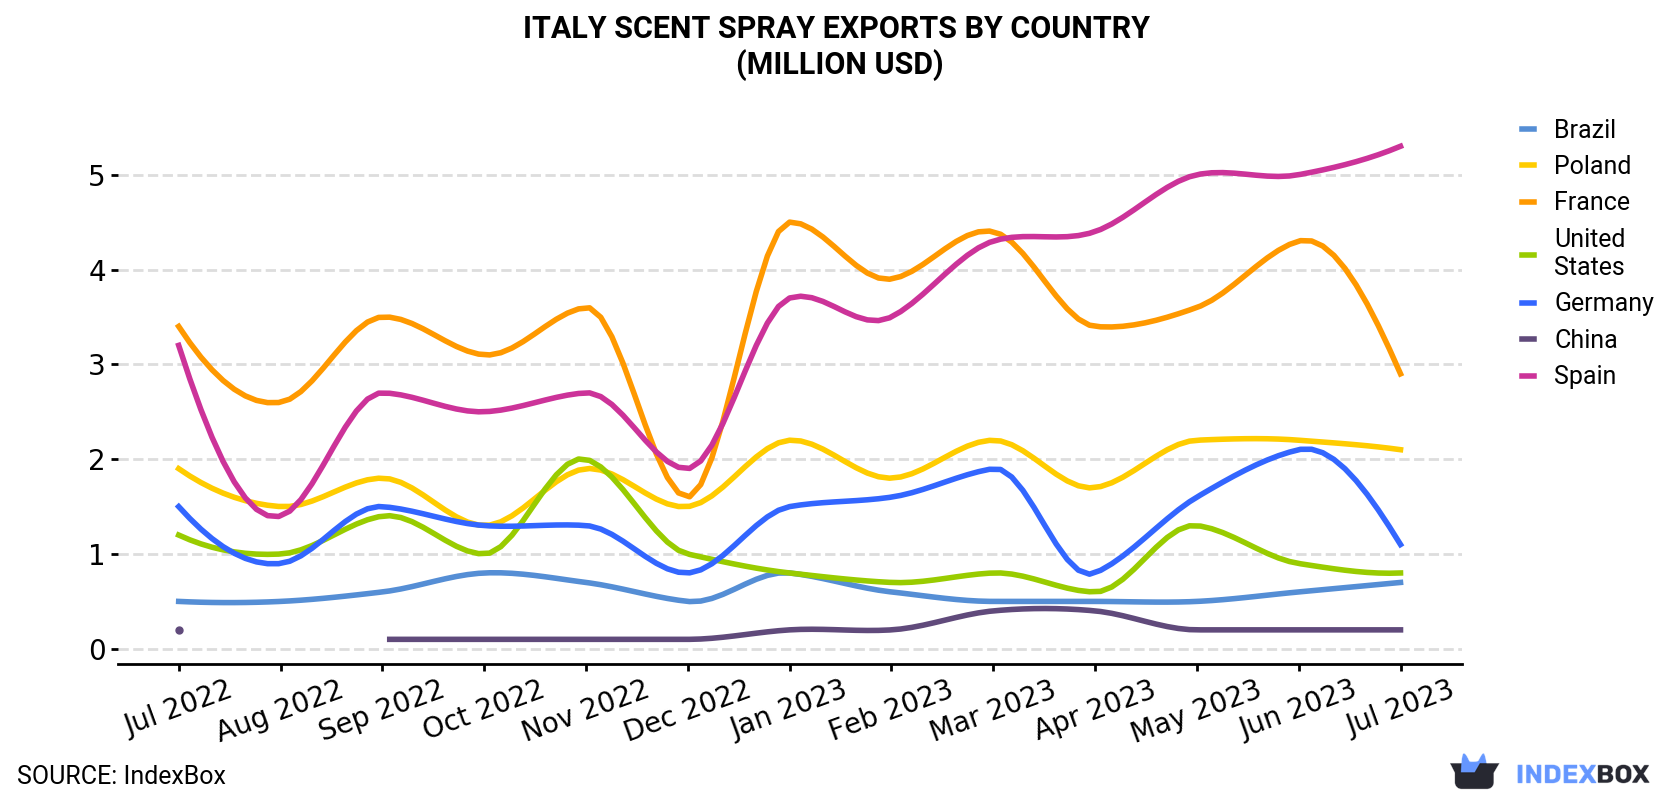 Italy Scent Spray Exports By Country (Million USD)